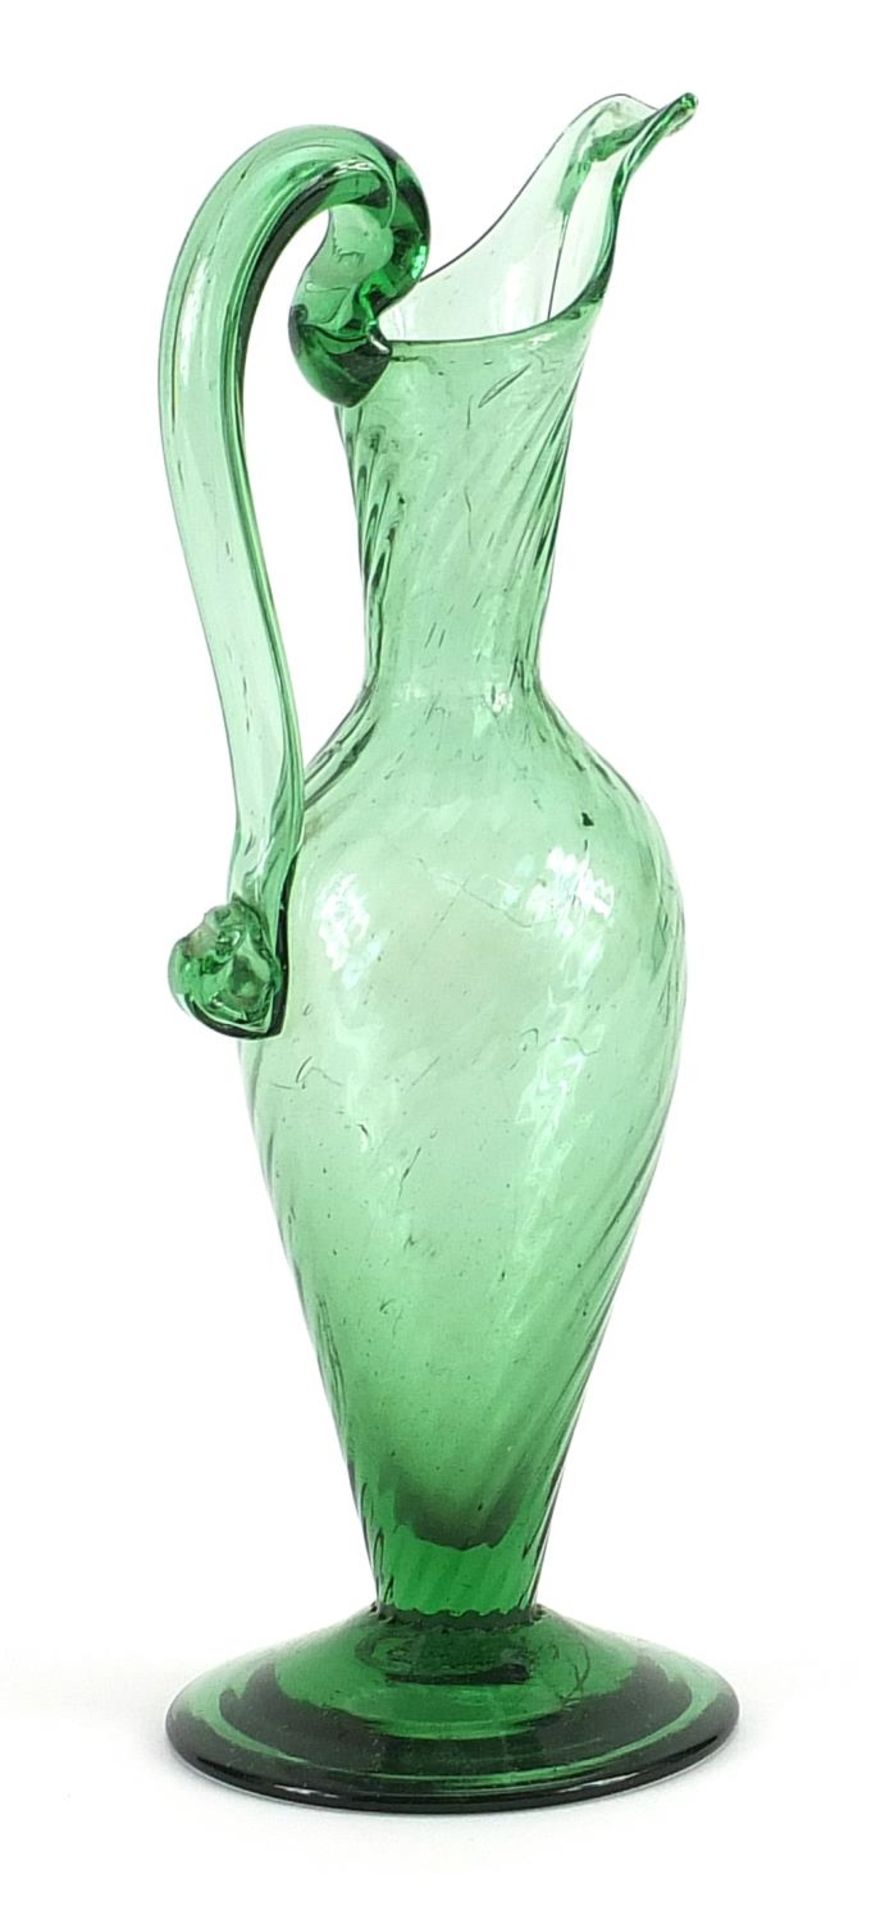 Antique green glass ewer with writhen body, 20.5cm high - Image 2 of 3